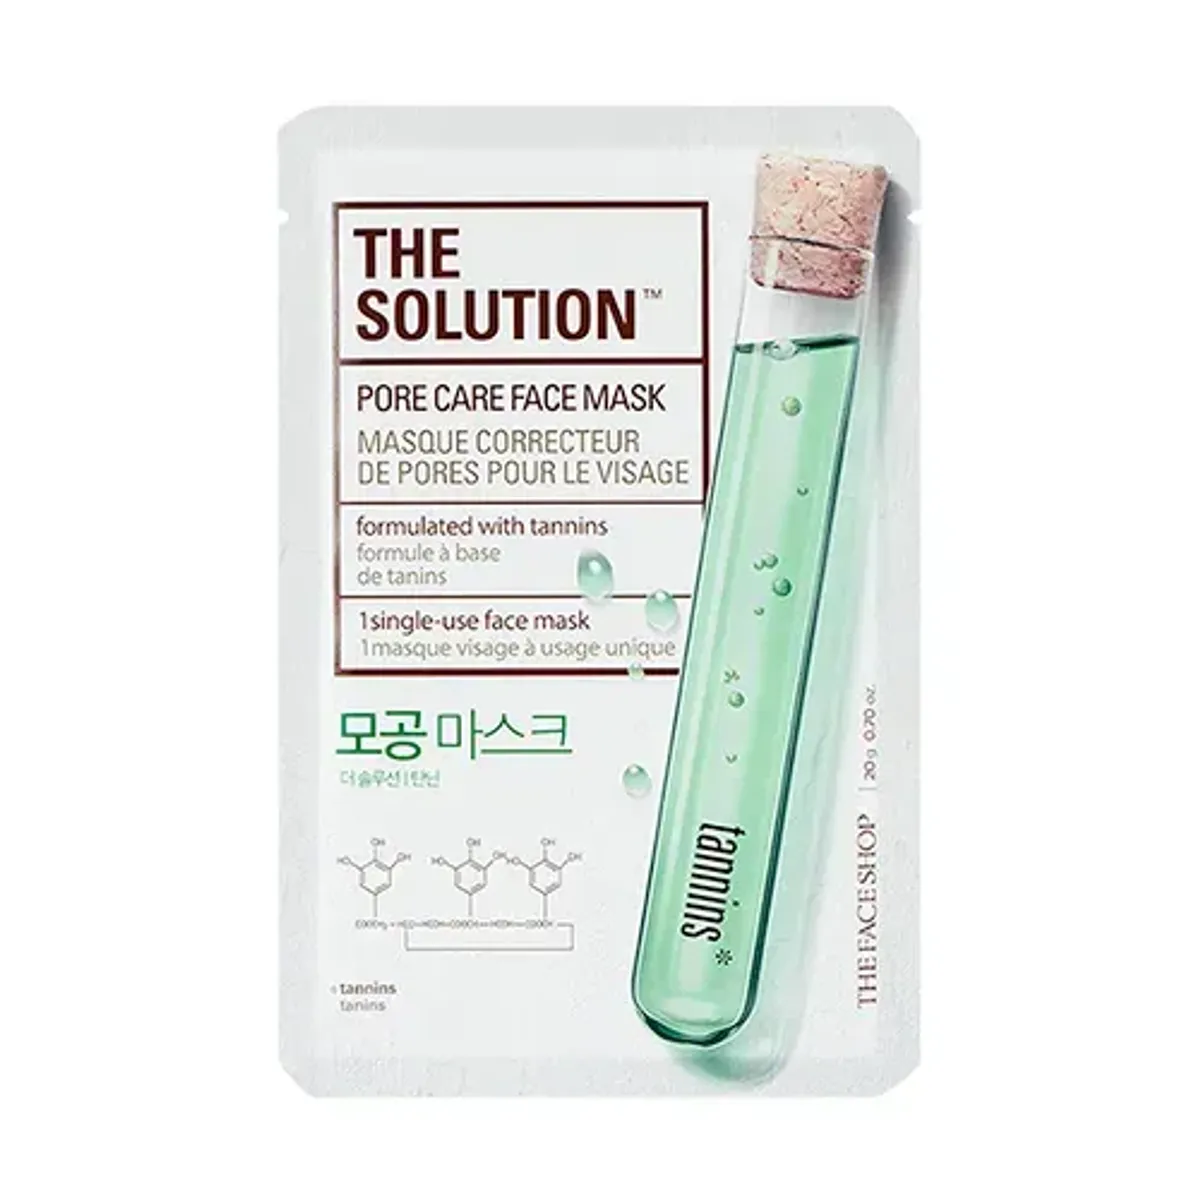 mat-na-cham-soc-lo-chan-long-the-solution-pore-care-face-mask-1